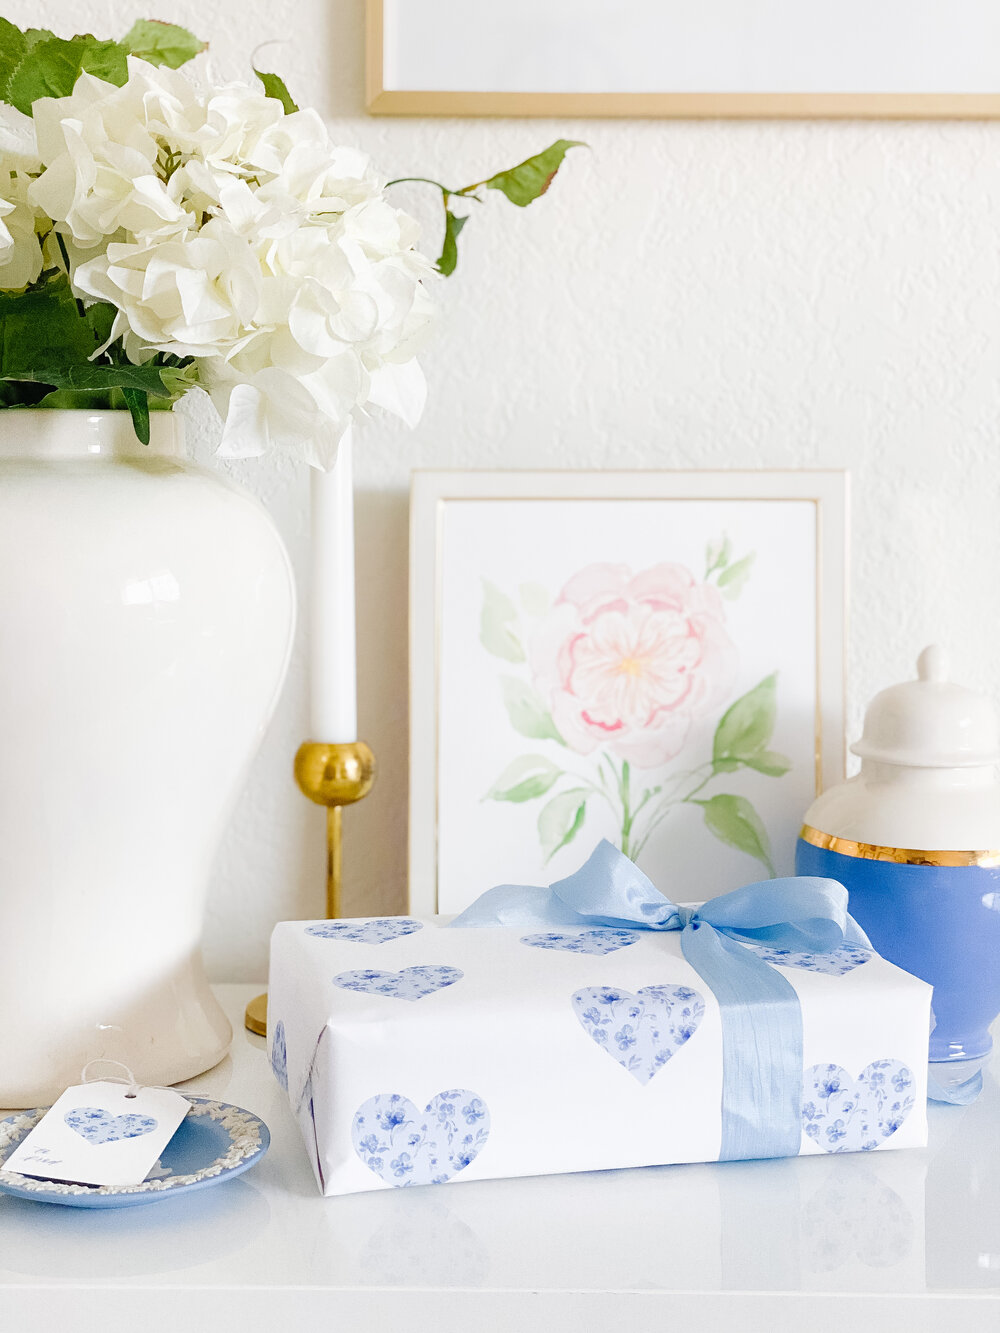 Modern navy blue white watercolor elegant floral Wrapping Paper by